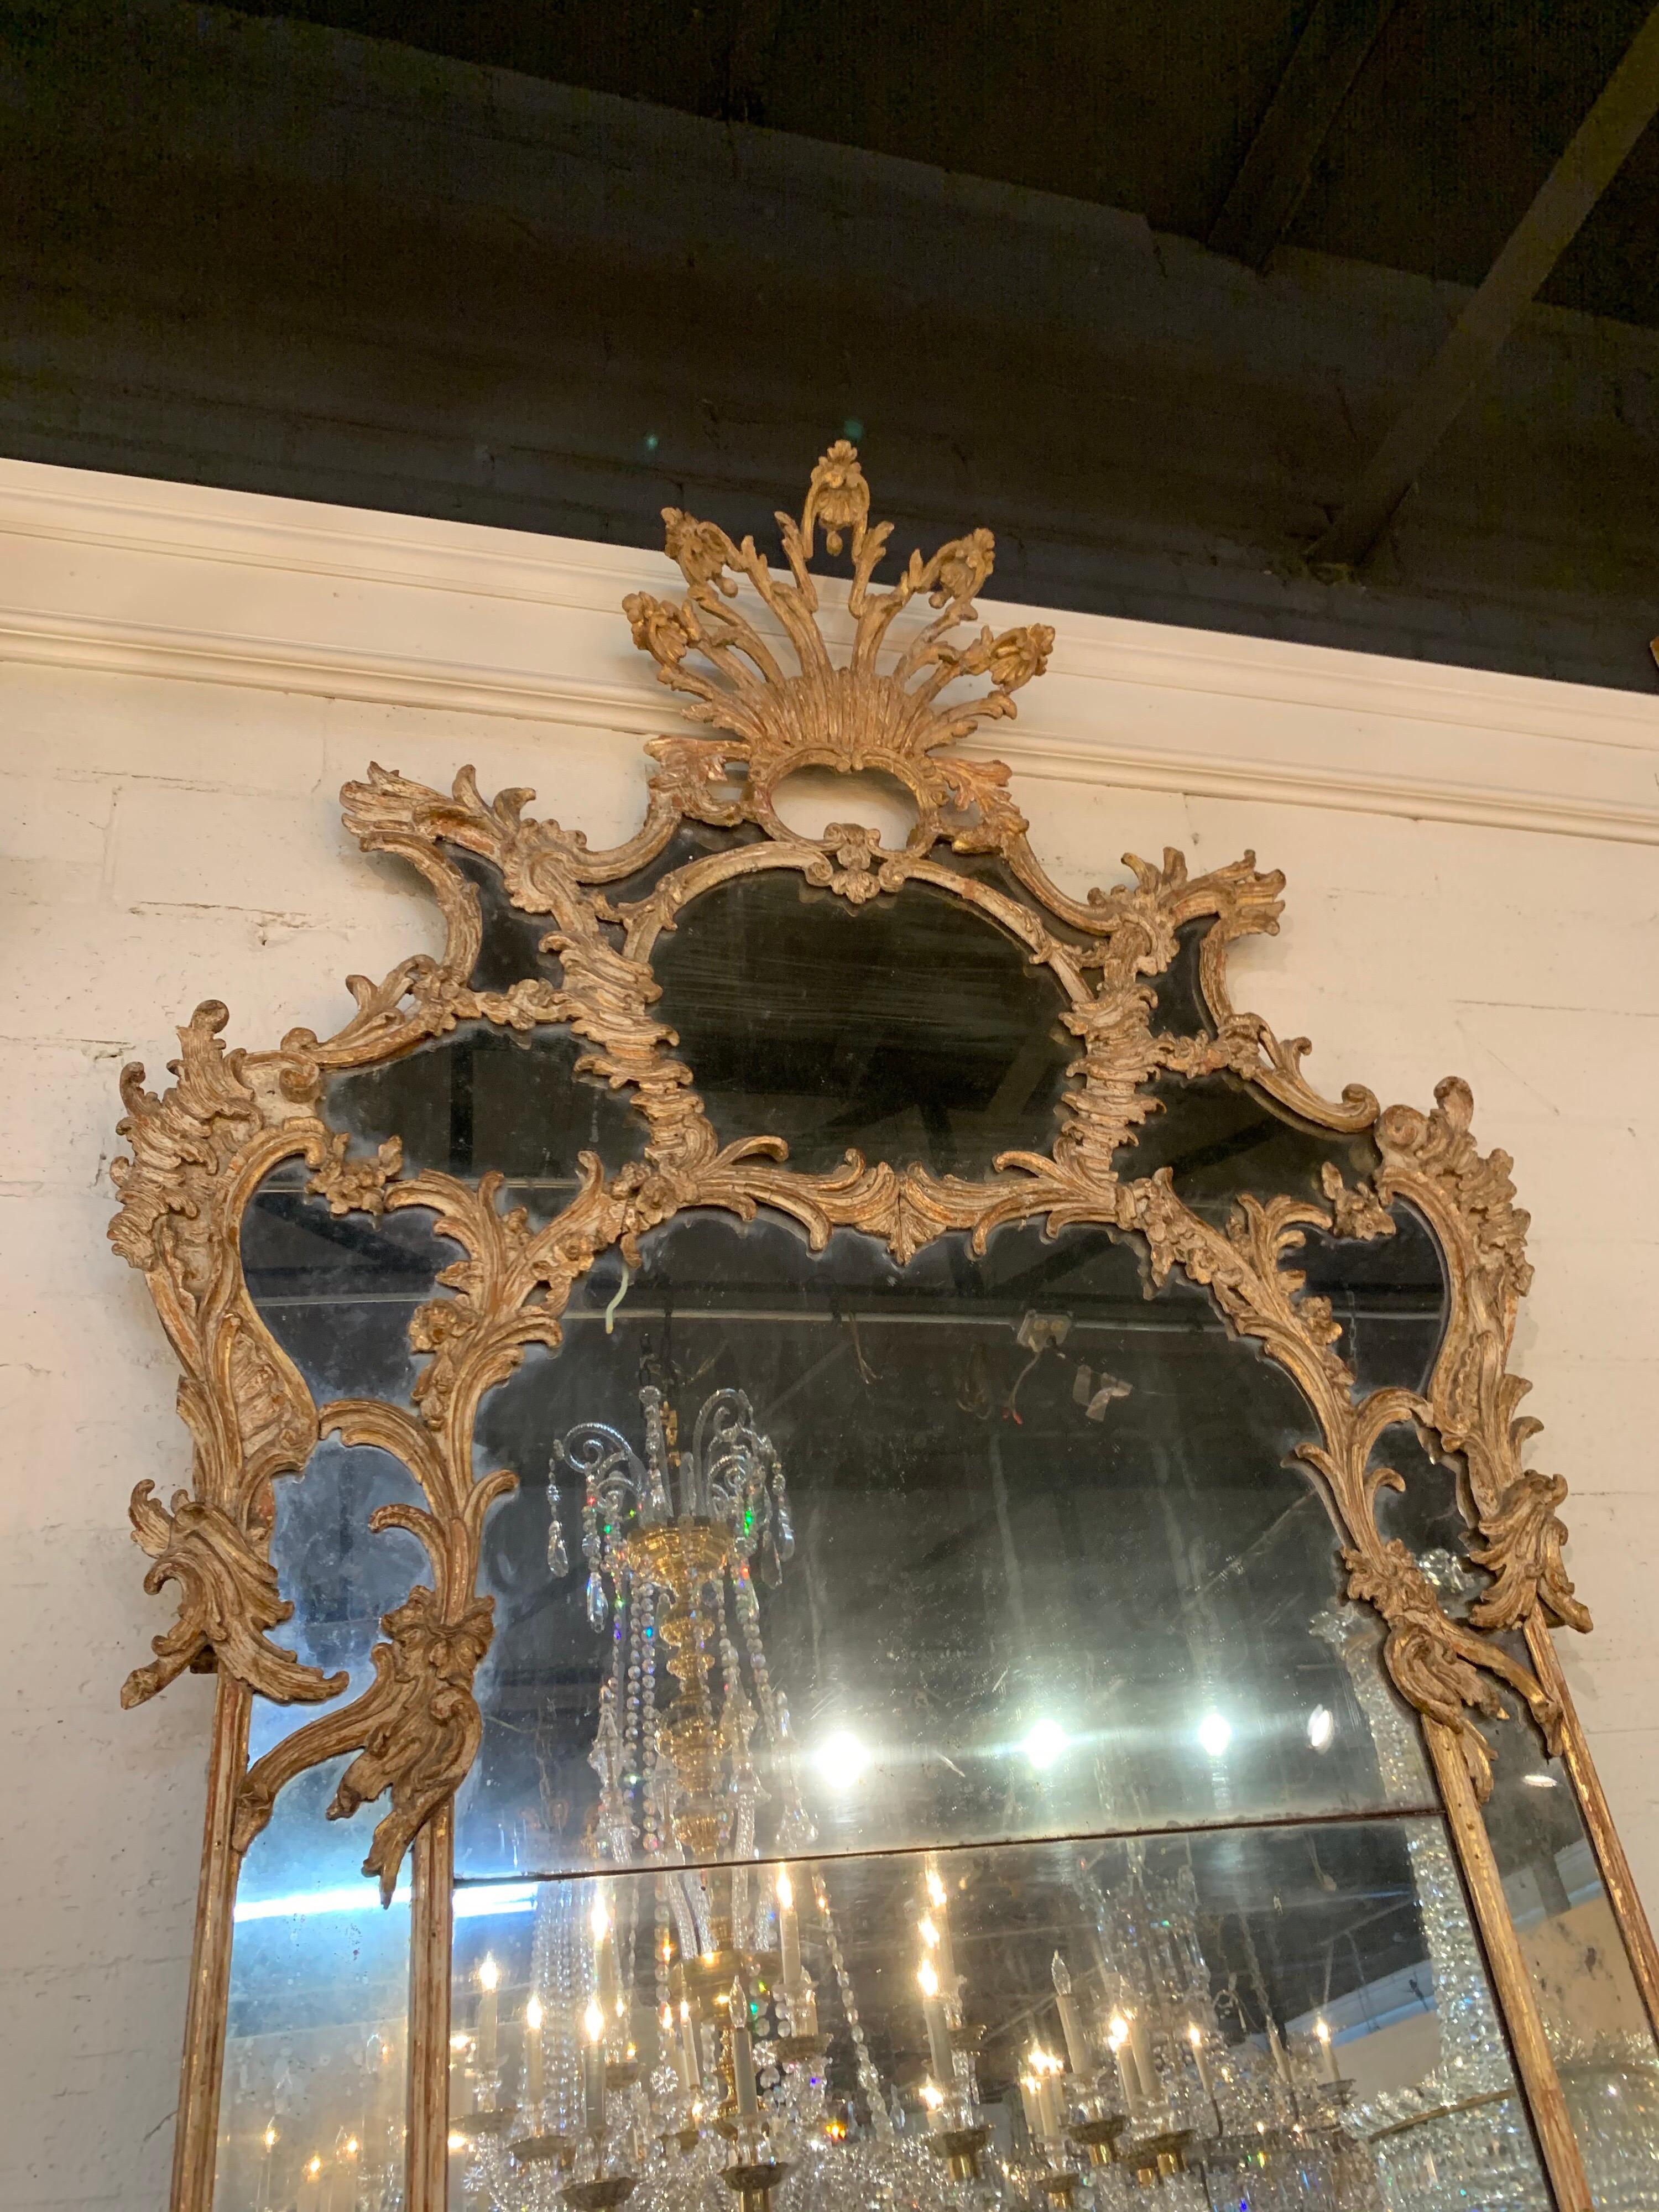 Gorgeous large scale 18th century Italian carved wood mirror with 2 panels. The panels are original mercury glass. Very fine carving on the wood and the patina is really nice as well. So pretty!